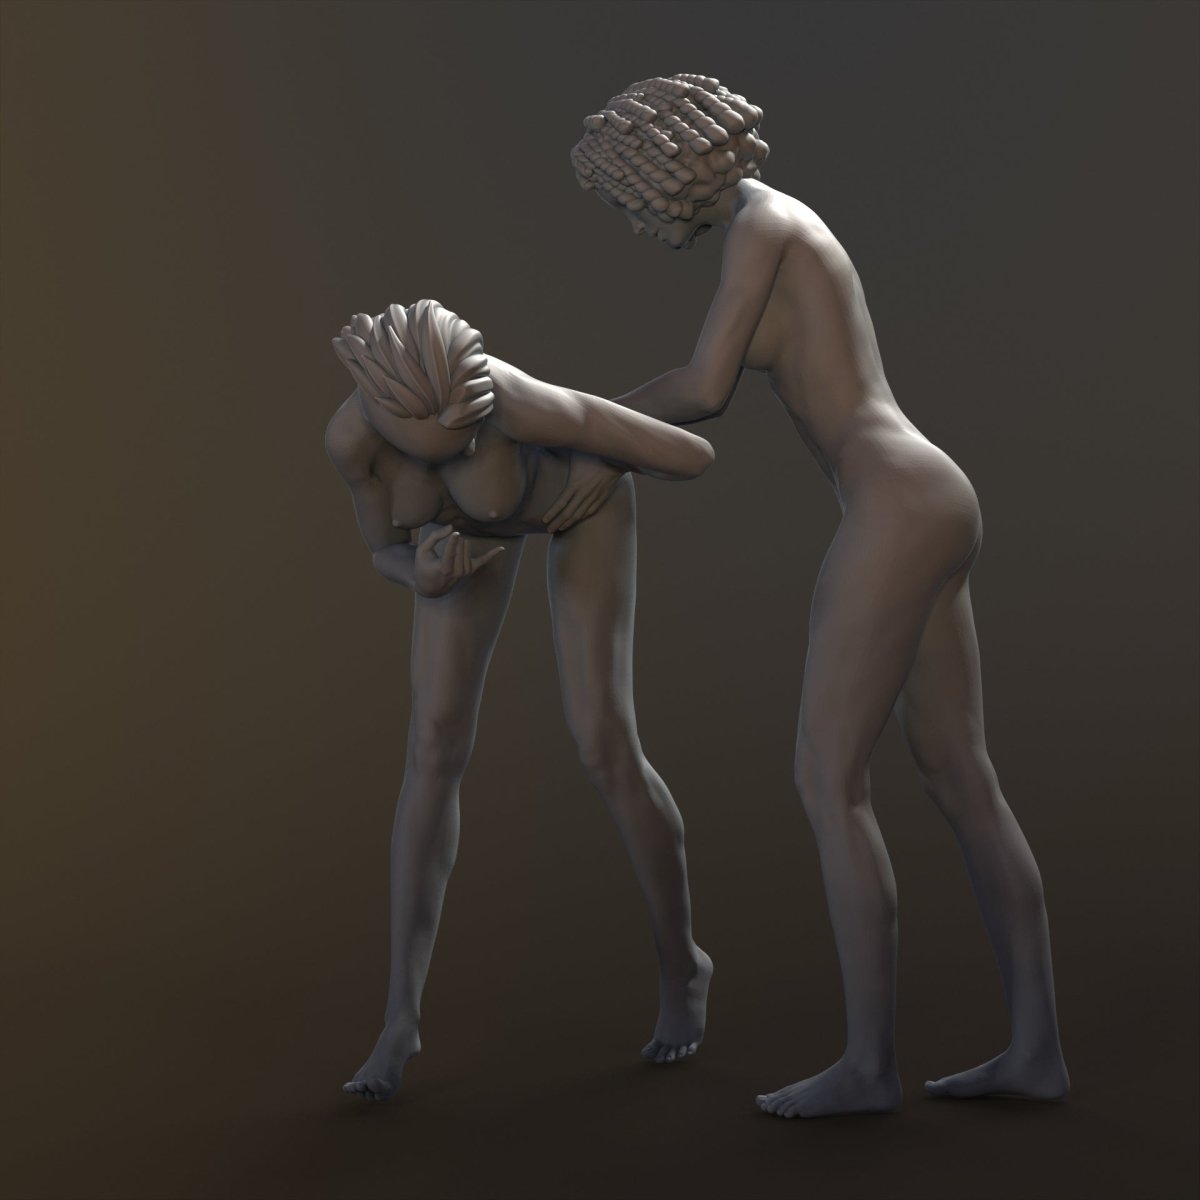 LESBIAN SPANK LOVE 3 Naked 3d Printed miniature Resin Collectables Statues & Figurines